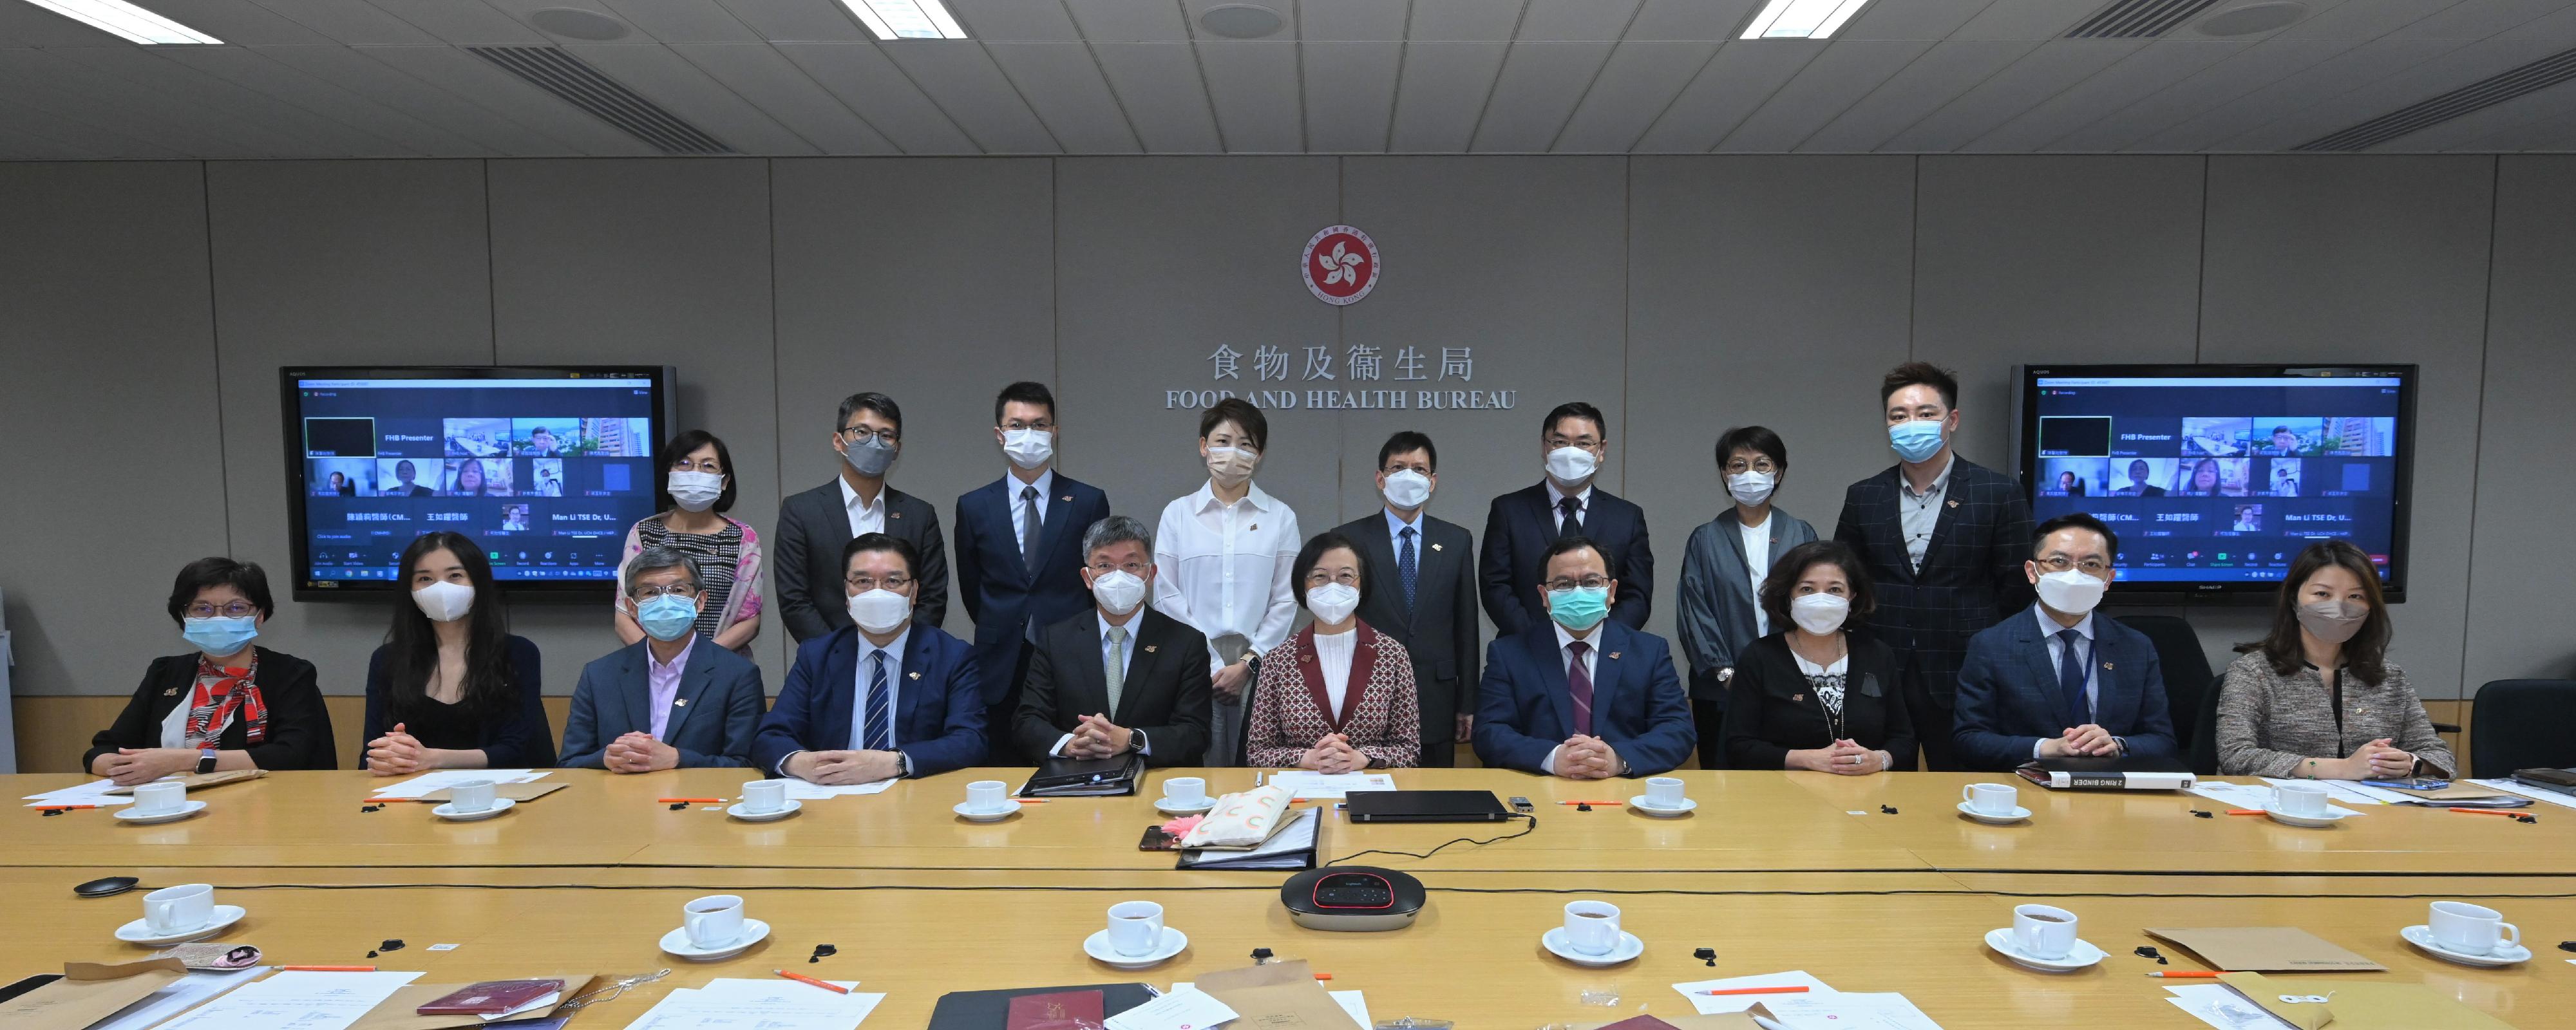 The Secretary for Food and Health, Professor Sophia Chan, chaired the 12th meeting of the Chinese Medicine Development Committee (CMDC) today (June 17). Photo shows Professor Chan (front row, fifth right); the Permanent Secretary for Food and Health (Health), Mr Thomas Chan (front row, fifth left); the Director of Health, Dr Ronald Lam (front row, second right); the Chairman of the Chinese Medicine Practice Subcommittee under the CMDC, Professor Chan Wing-kwong (front row, fourth right); and the Chairman of the Chinese Medicines Industry Subcommittee under the CMDC, Mr Tommy Li (front row, fourth left), as well as other members, before the meeting.